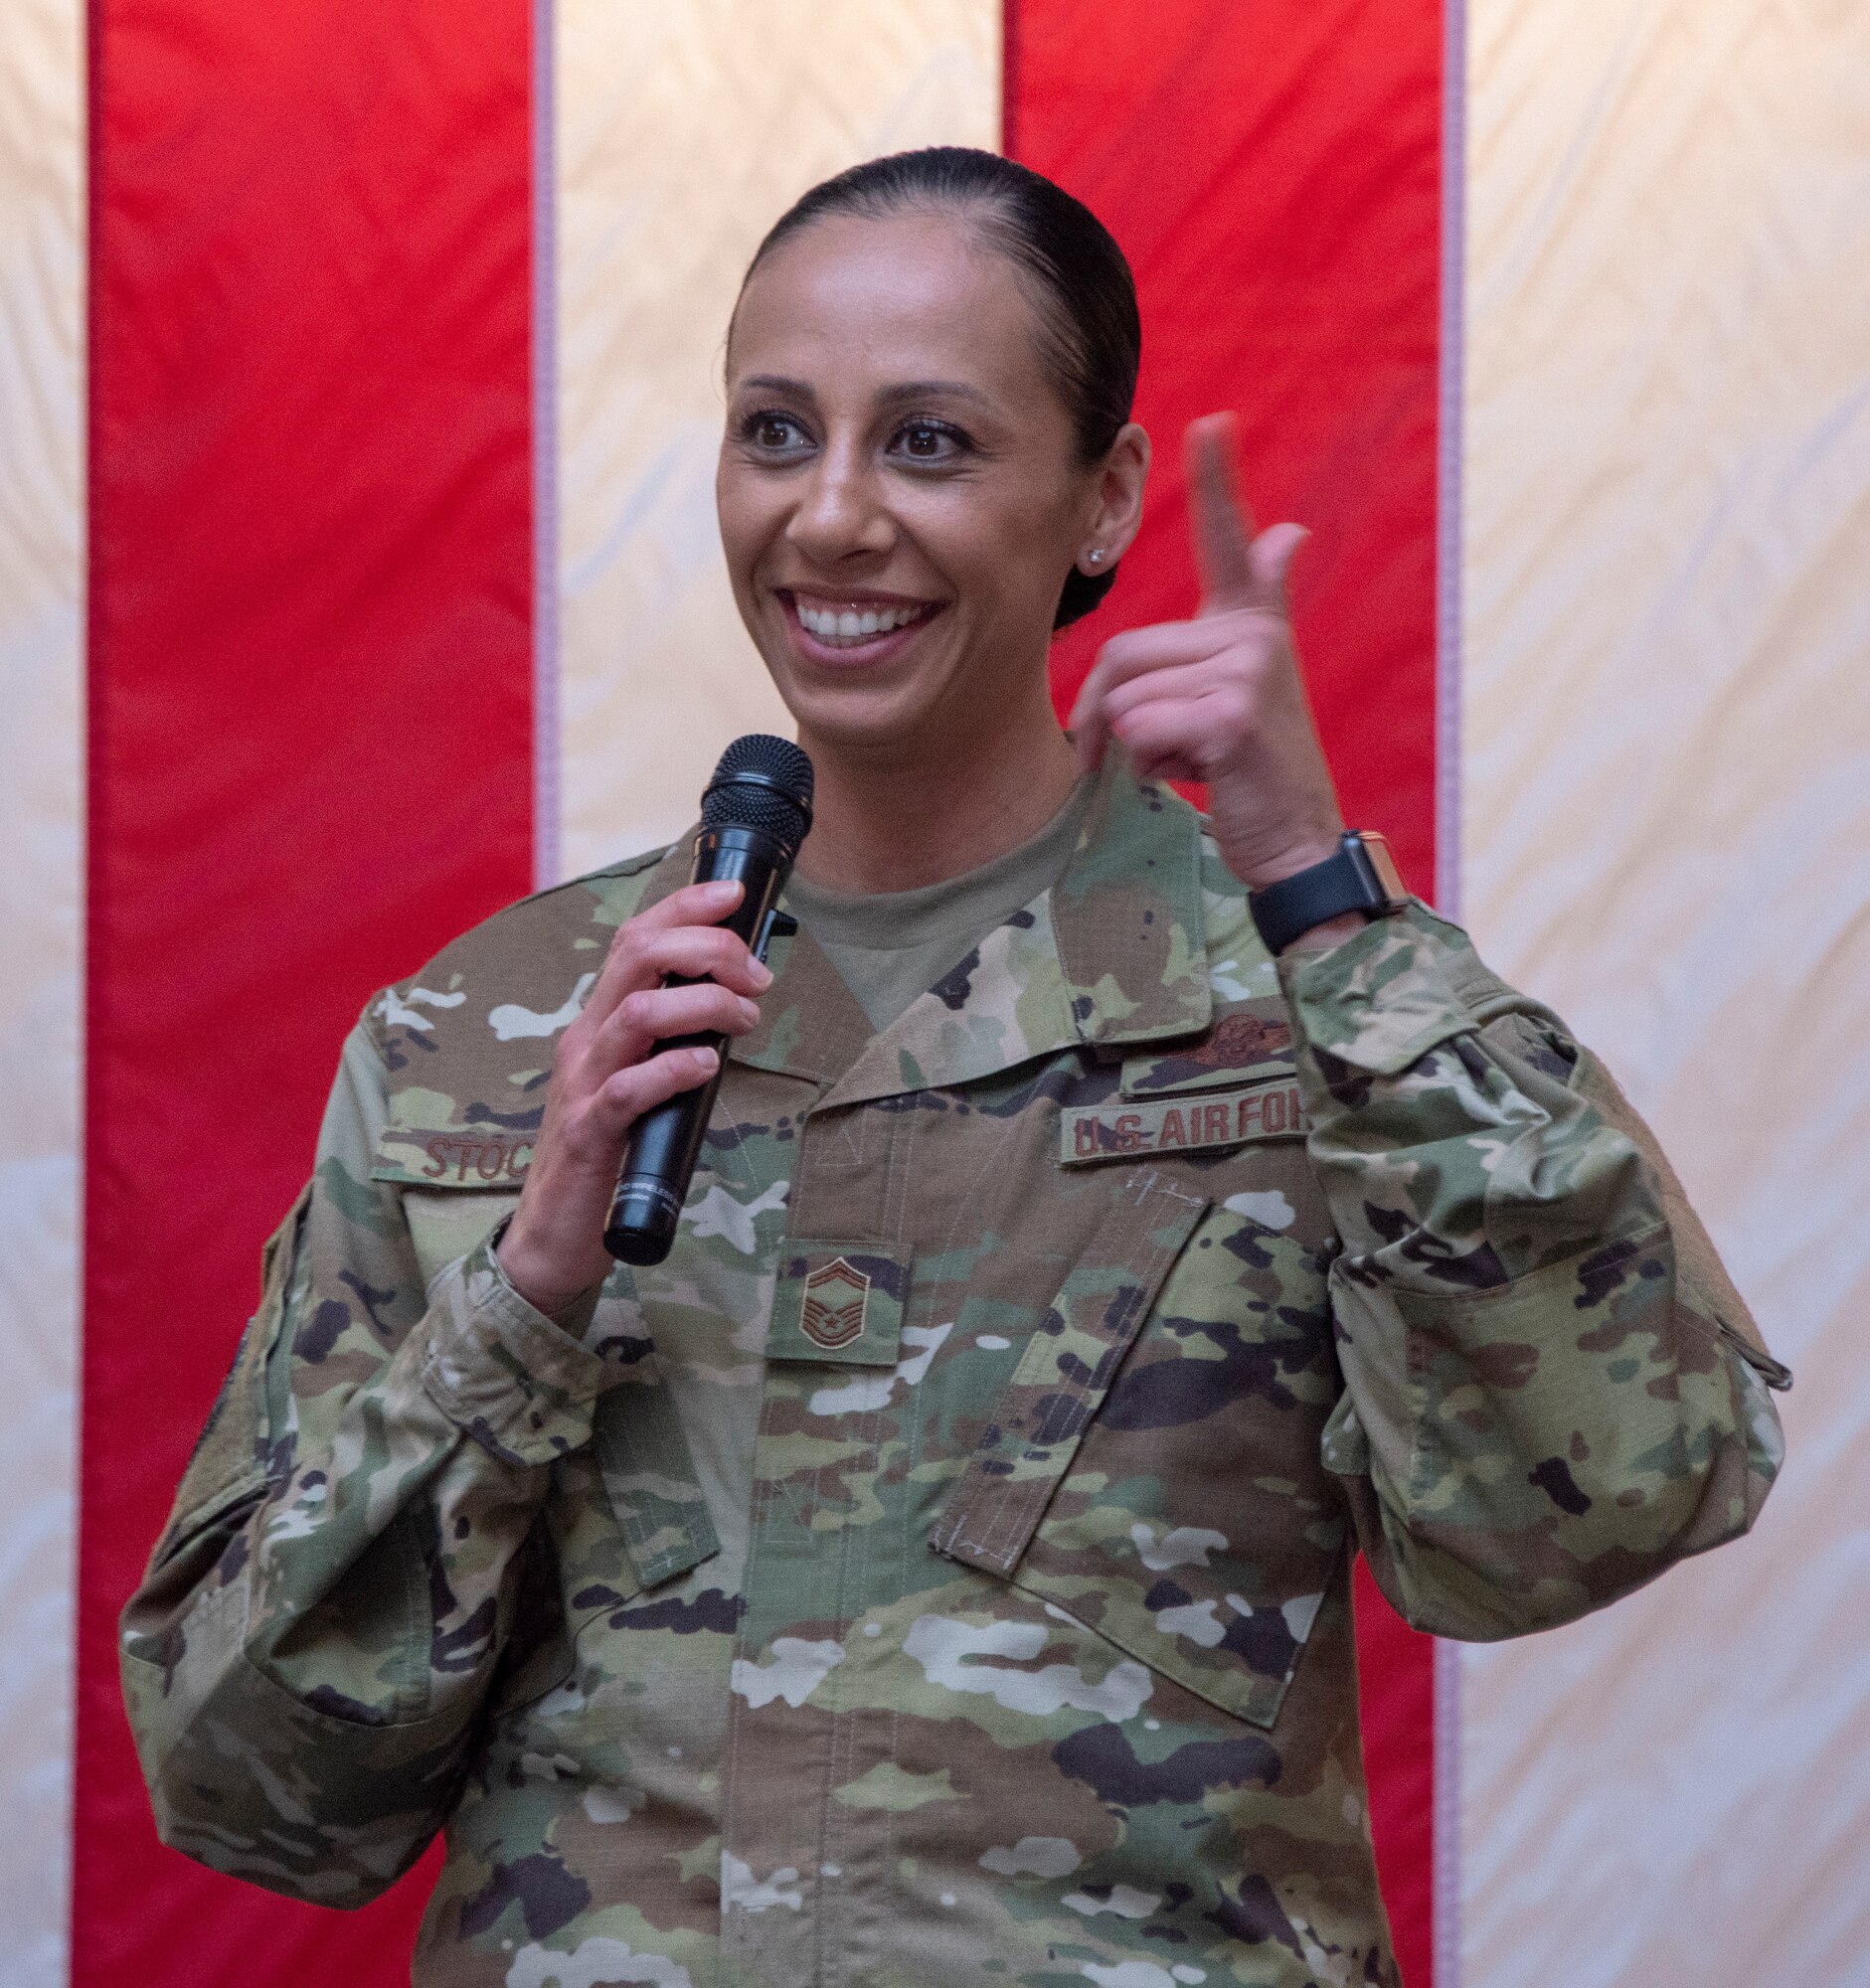 U.S. Air Force Senior Master Sgt. Lucero Stockett, 6th Air Refueling Squadron, delivers remarks during the Women’s History Month social gathering, March 20, 2019, at Travis Air Force Base, California. Since 1987, the month of March has been designated to celebrate the historical and ongoing achievements and contributions of women. Members of the Women Inspiring the Next Generation’s Success committee were responsible for organizing the event which included an exhibit highlighting extraordinary female heroes and featured speakers prominent in the Travis community. (U.S. Air Force photo by Heide Couch)